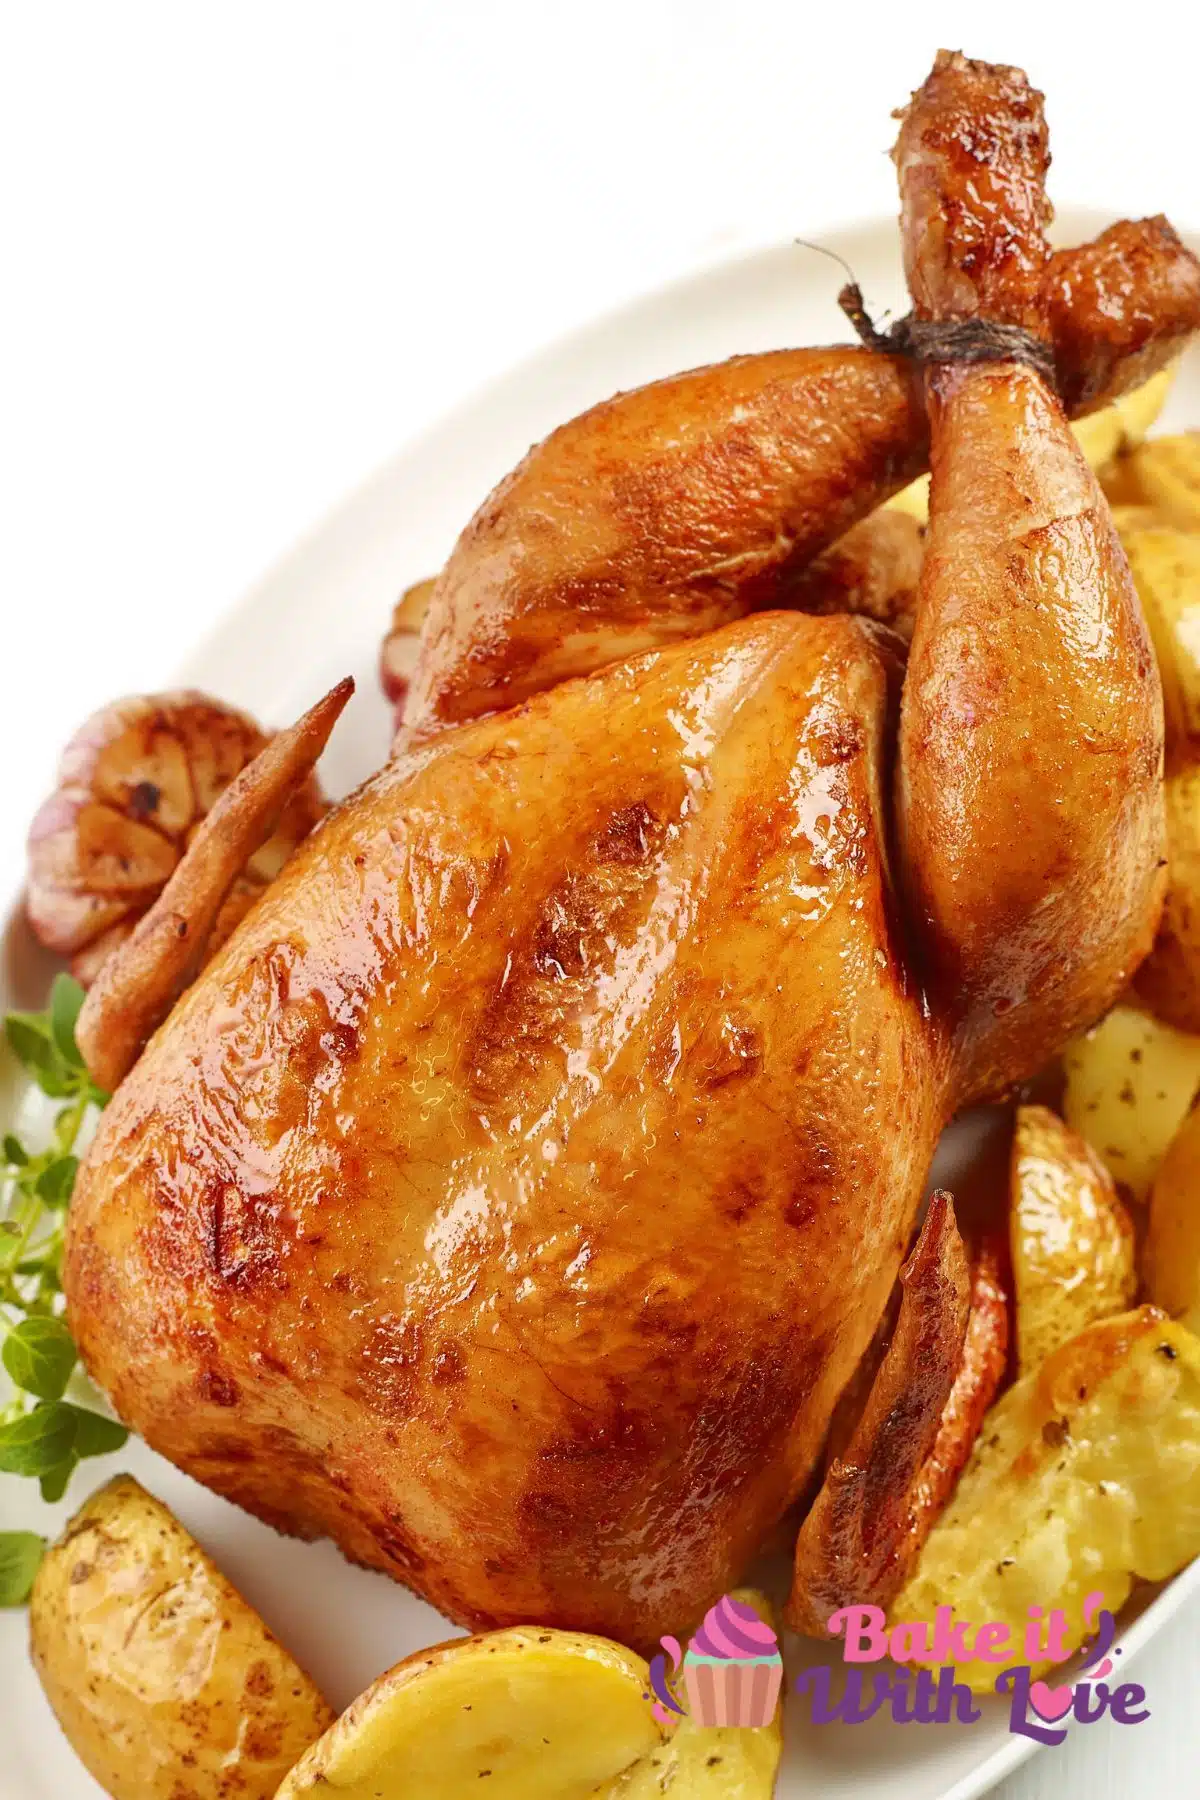 Tall image showing roast capon.